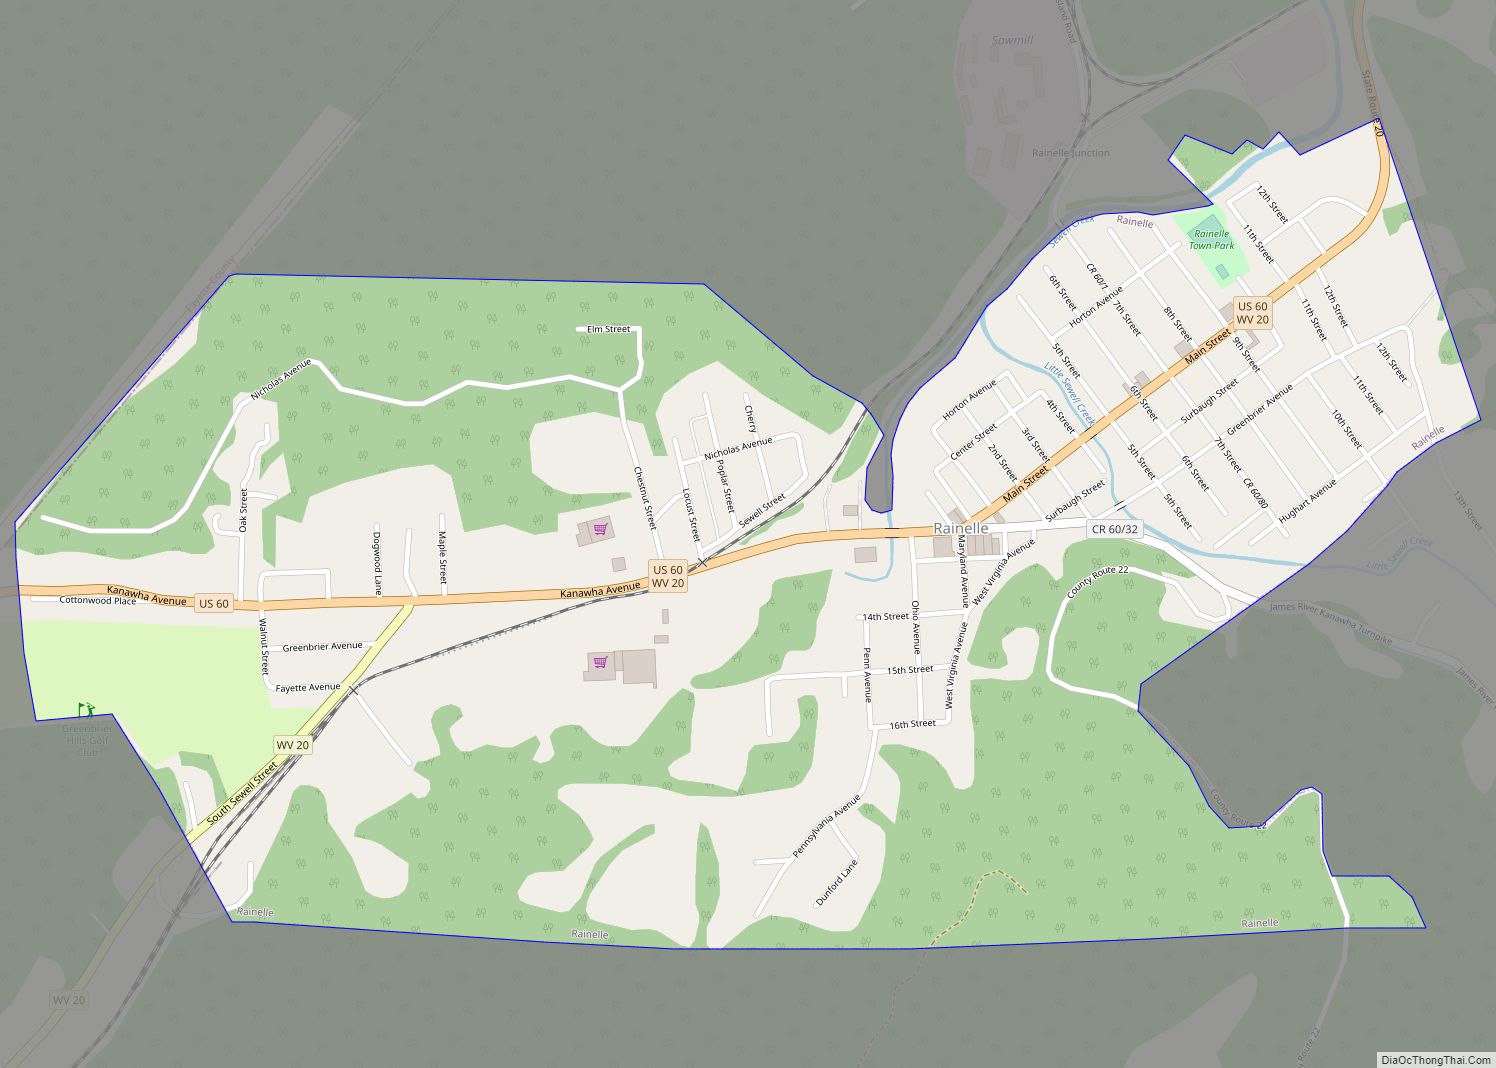 Map of Rainelle town